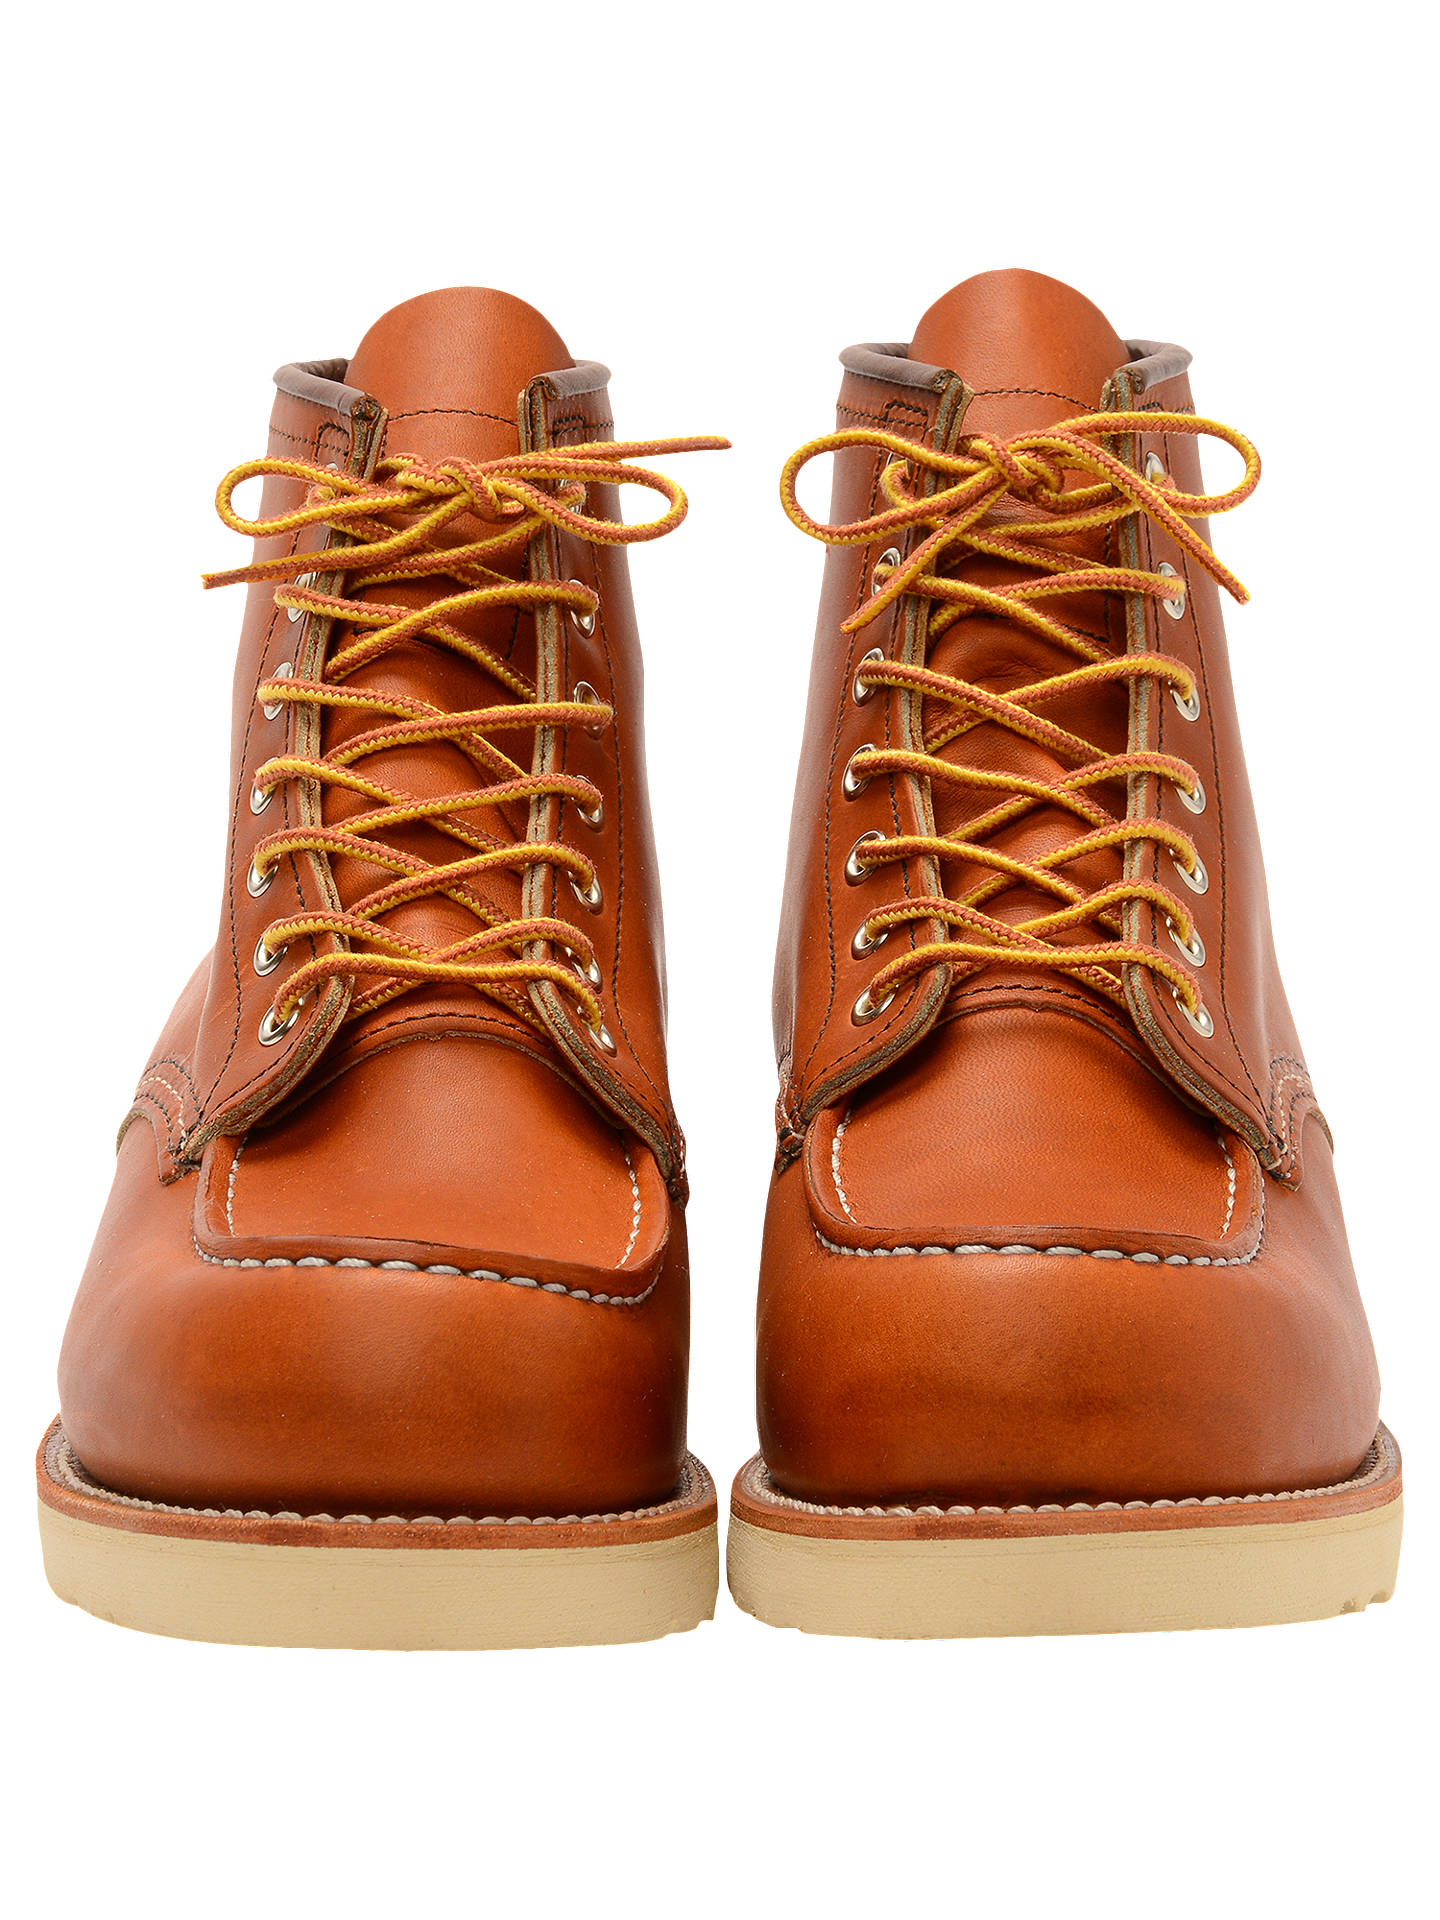 Red Wing 875 Moc Toe Boot at John Lewis & Partners